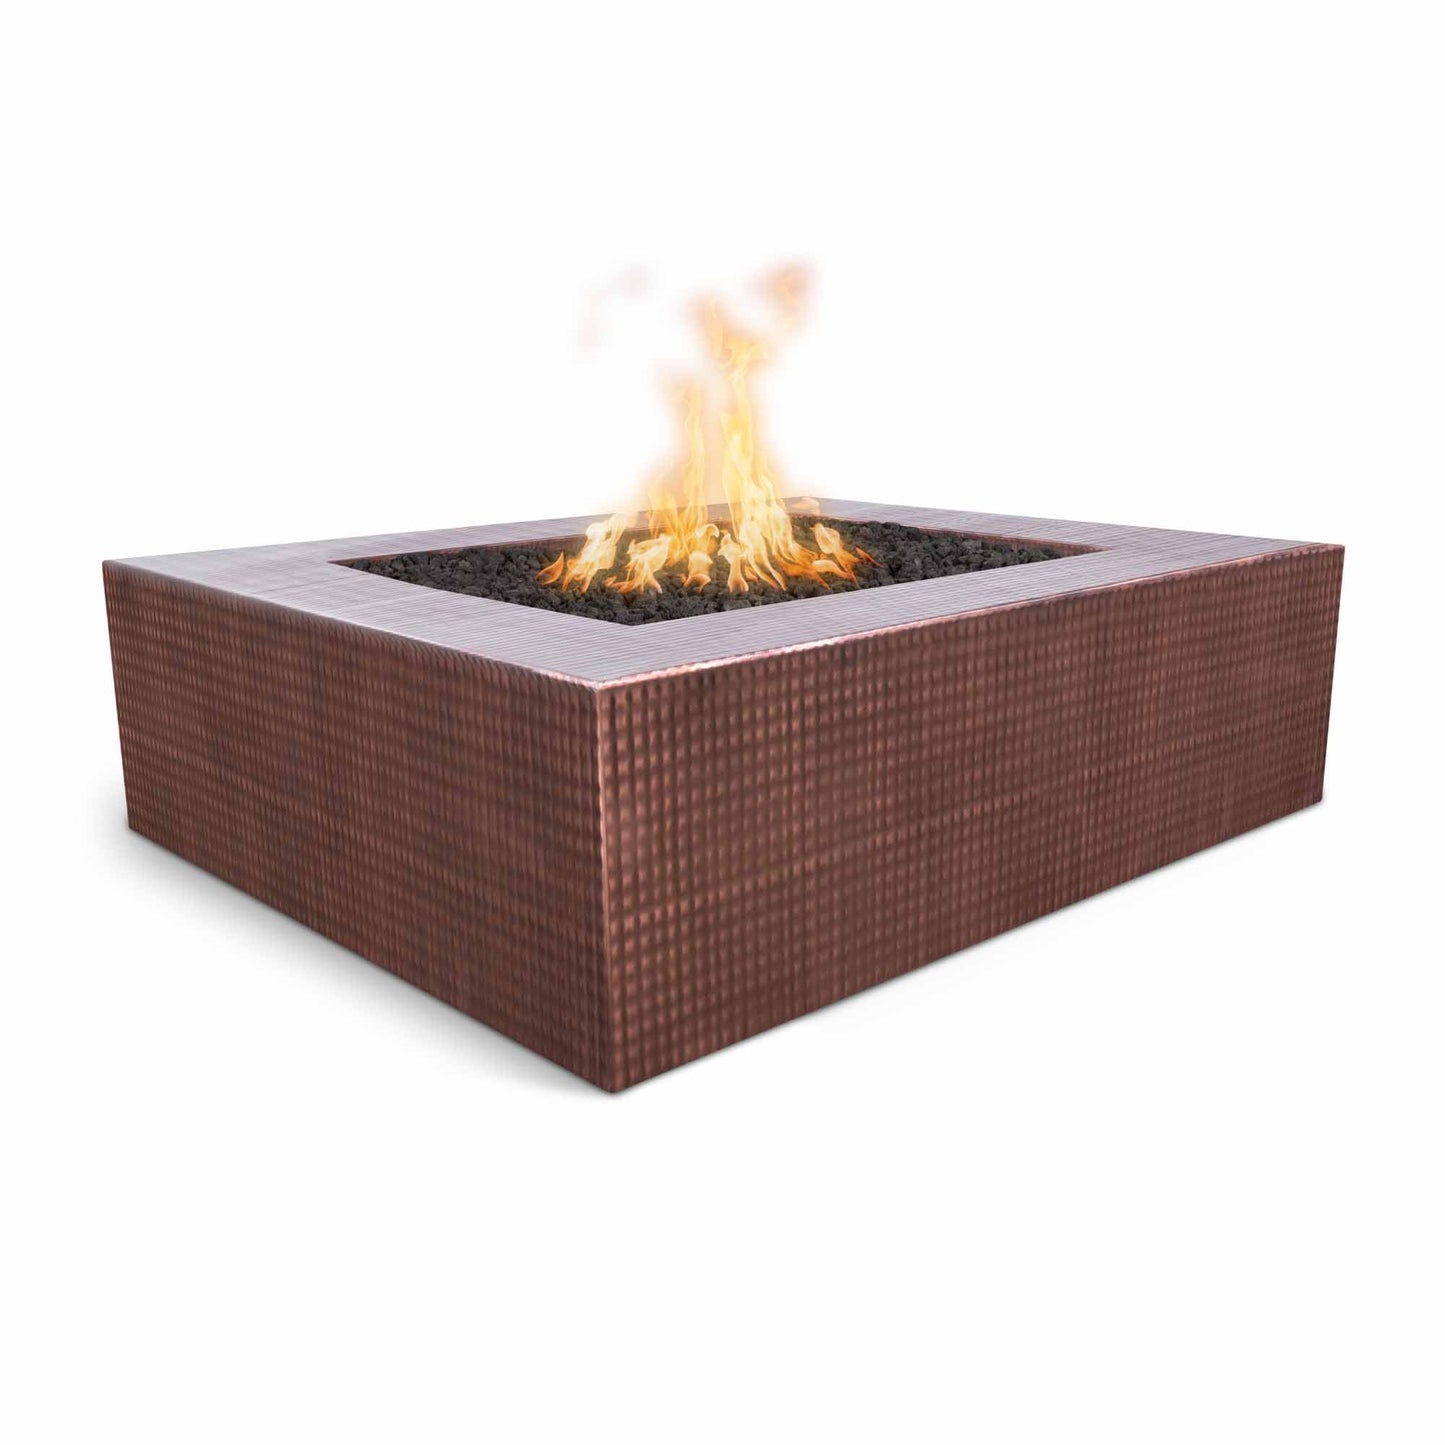 The Outdoor Plus Square Quad 36" Hammered Copper Liquid Propane Fire Pit with 110V Electronic Ignition